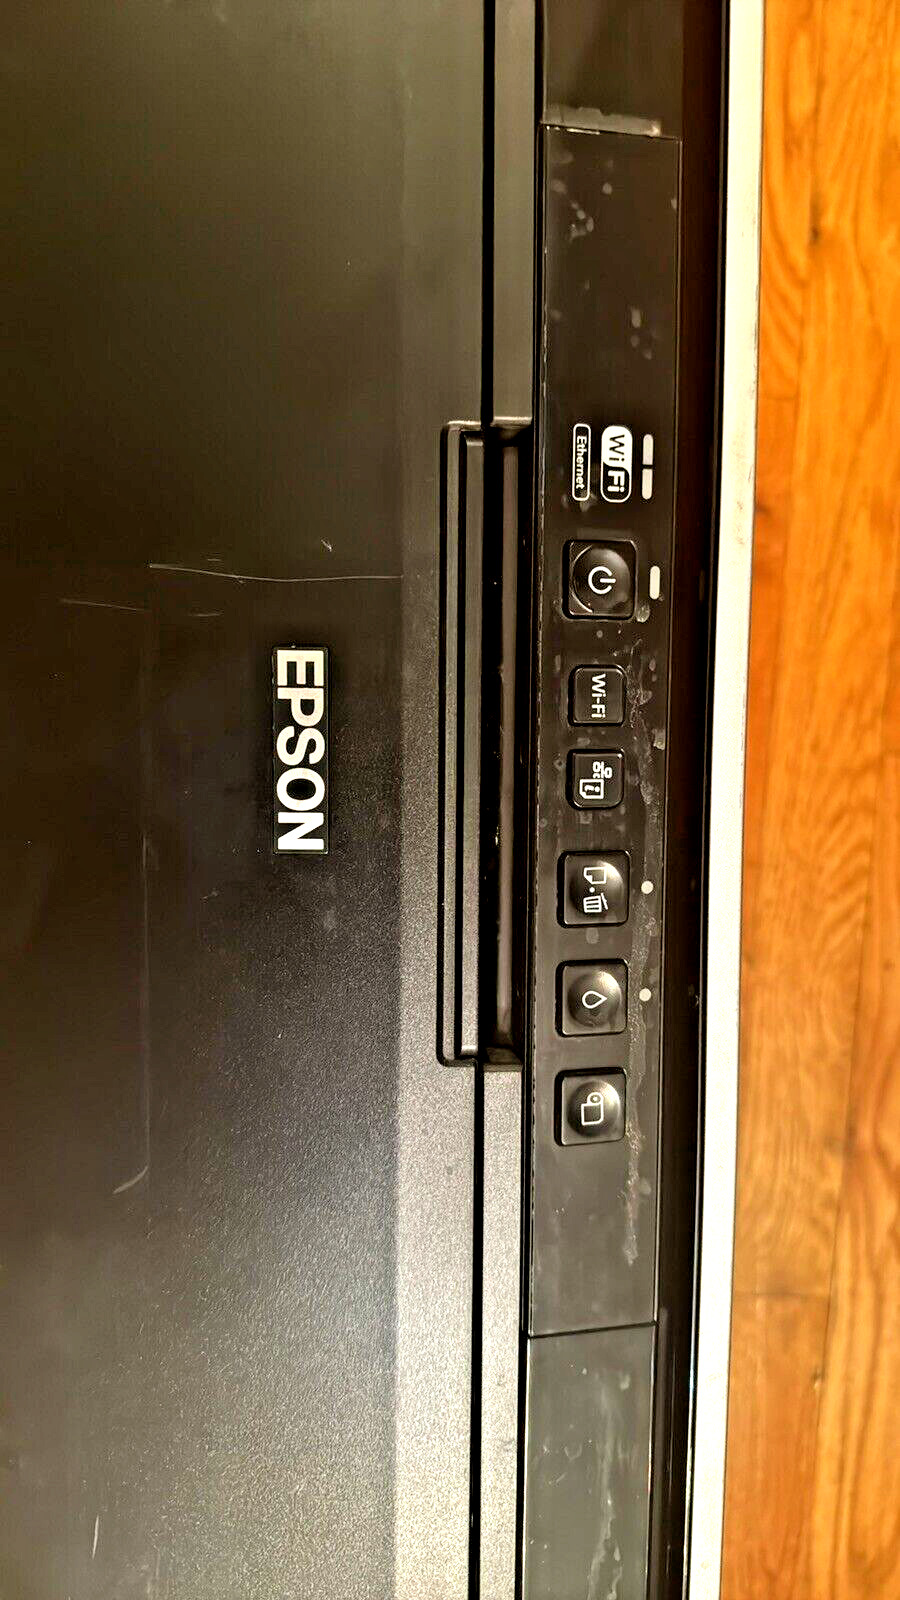 Top Notch Epson Stylus Laser Printer in Great Condtion 